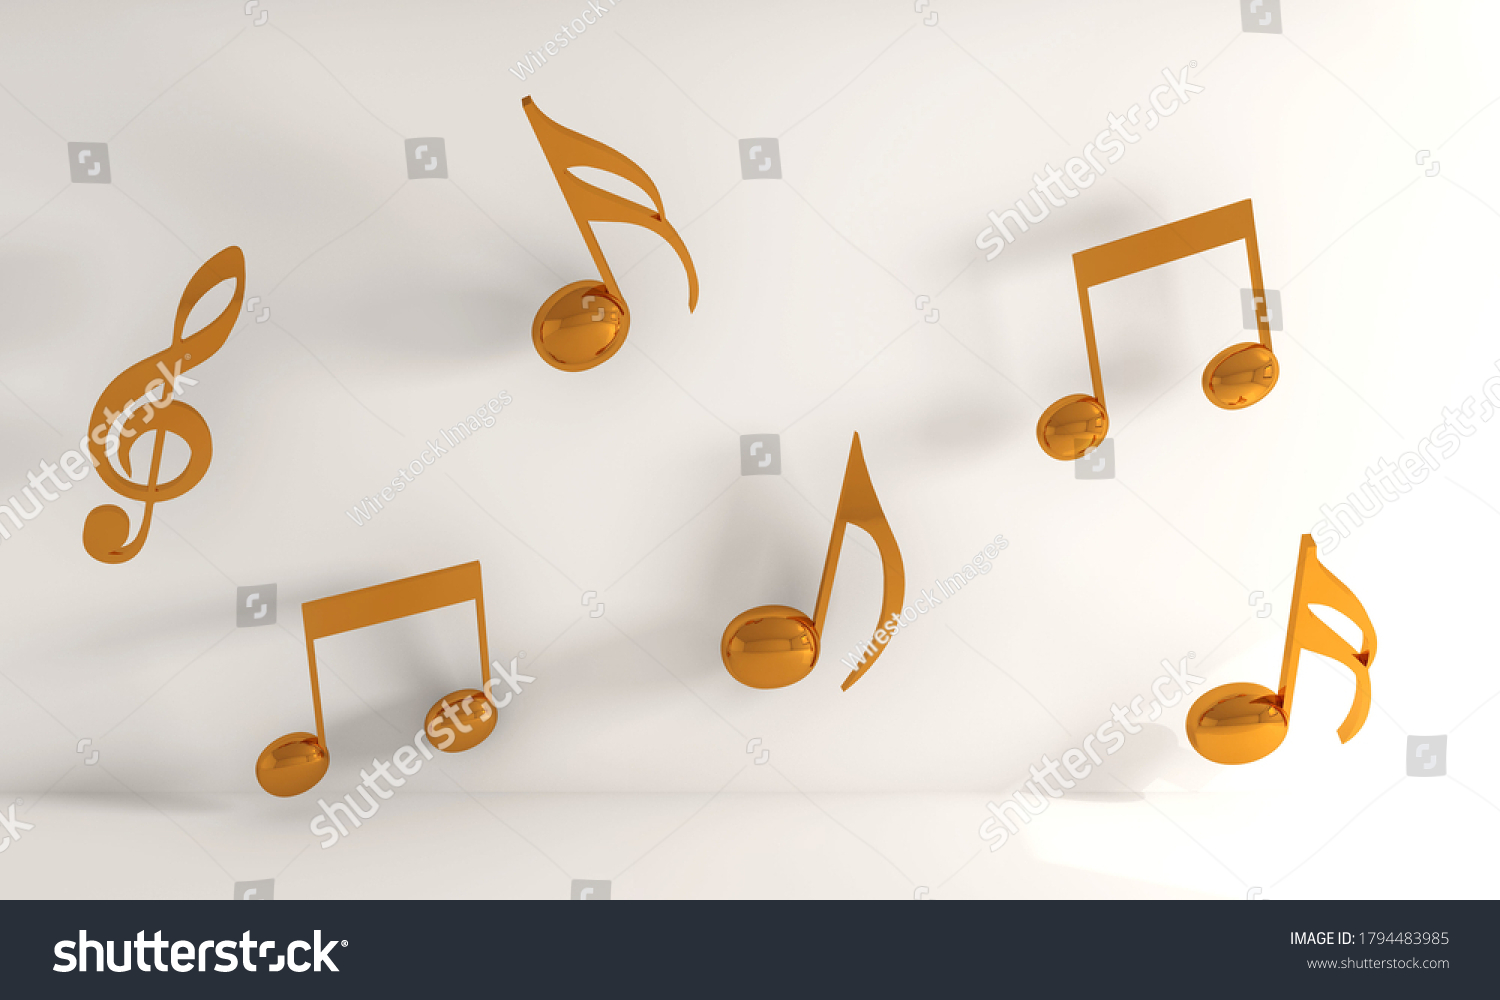 A 3D rendering illustration of yellow music notes on a white background #1794483985